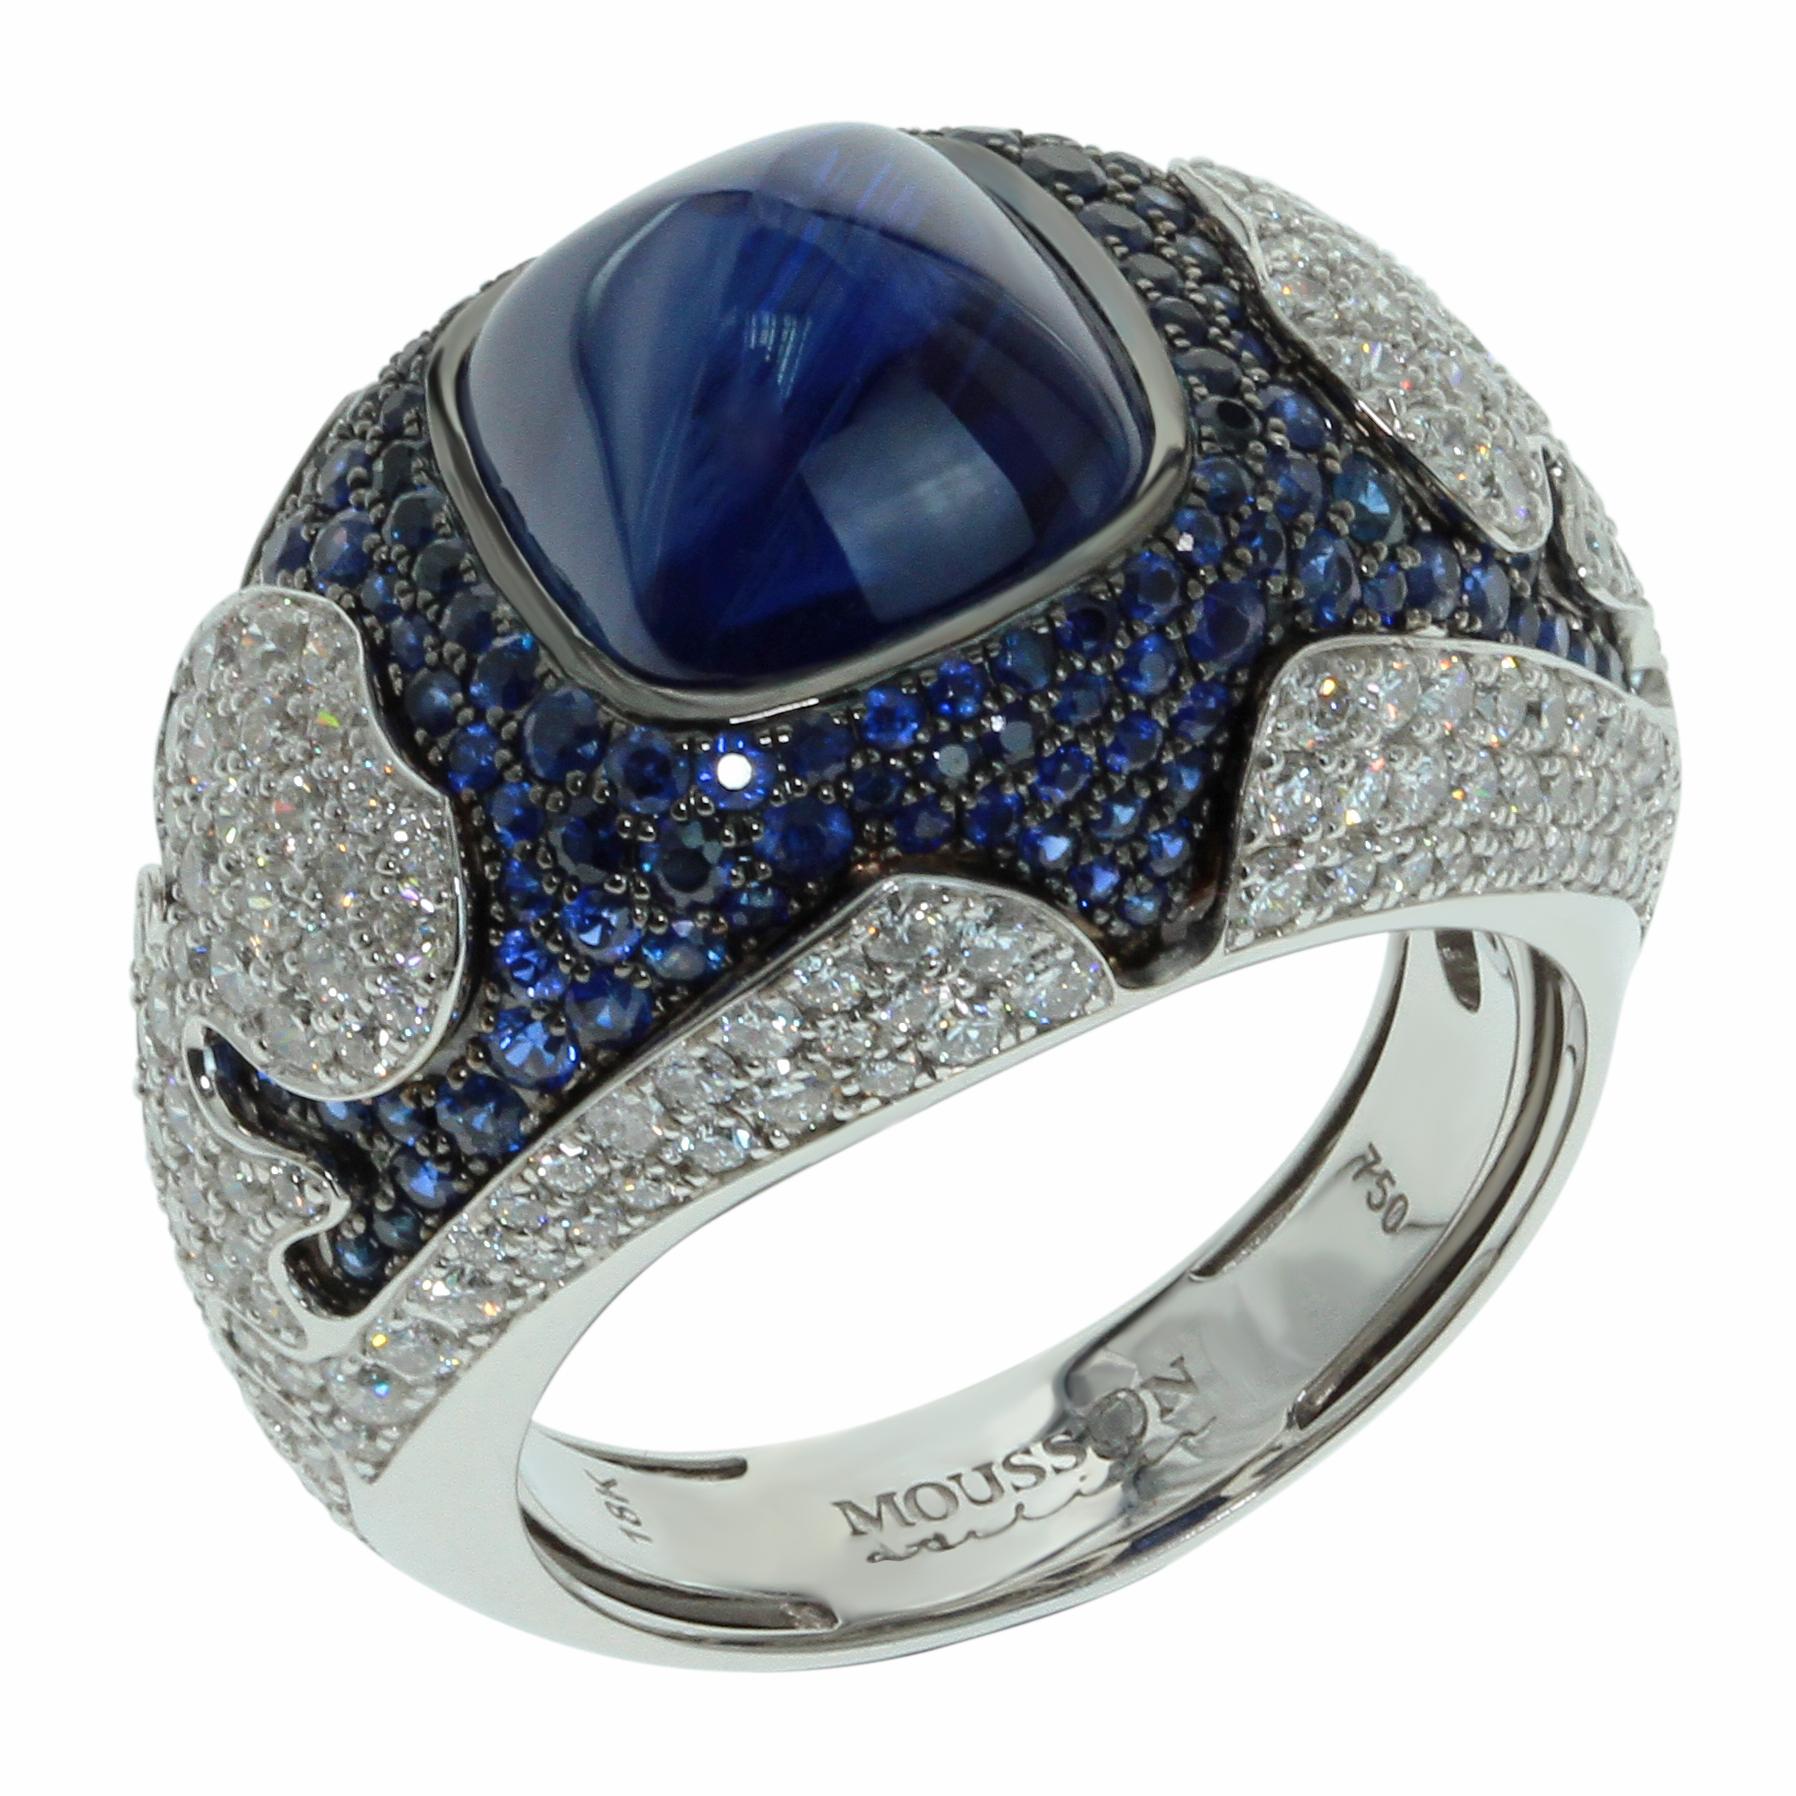 Blue Sapphire 10.31 Carat Diamonds 18 Karat White Gold Maghreb Ring
Maghreb is a name given by medieval Arab sailors, geographers and historians to the countries of North Africa located to the west of Egypt. Inspired by the culture of the Maghreb